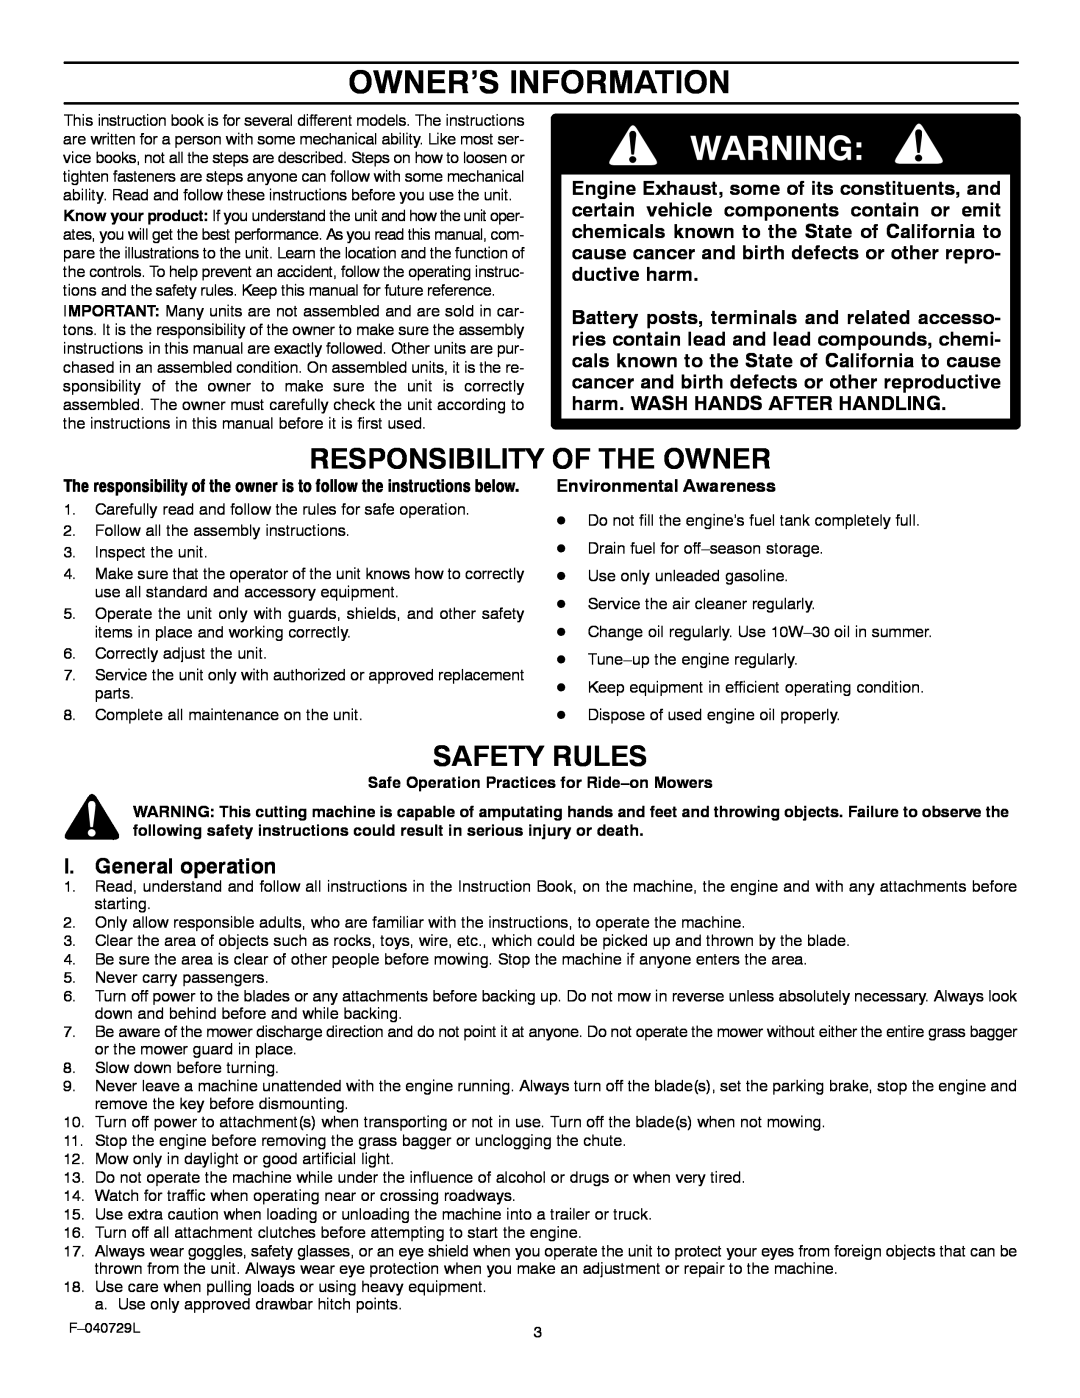 Murray 425620x92A manual Owner’S Information, Responsibility Of The Owner, Safety Rules, I. General operation 